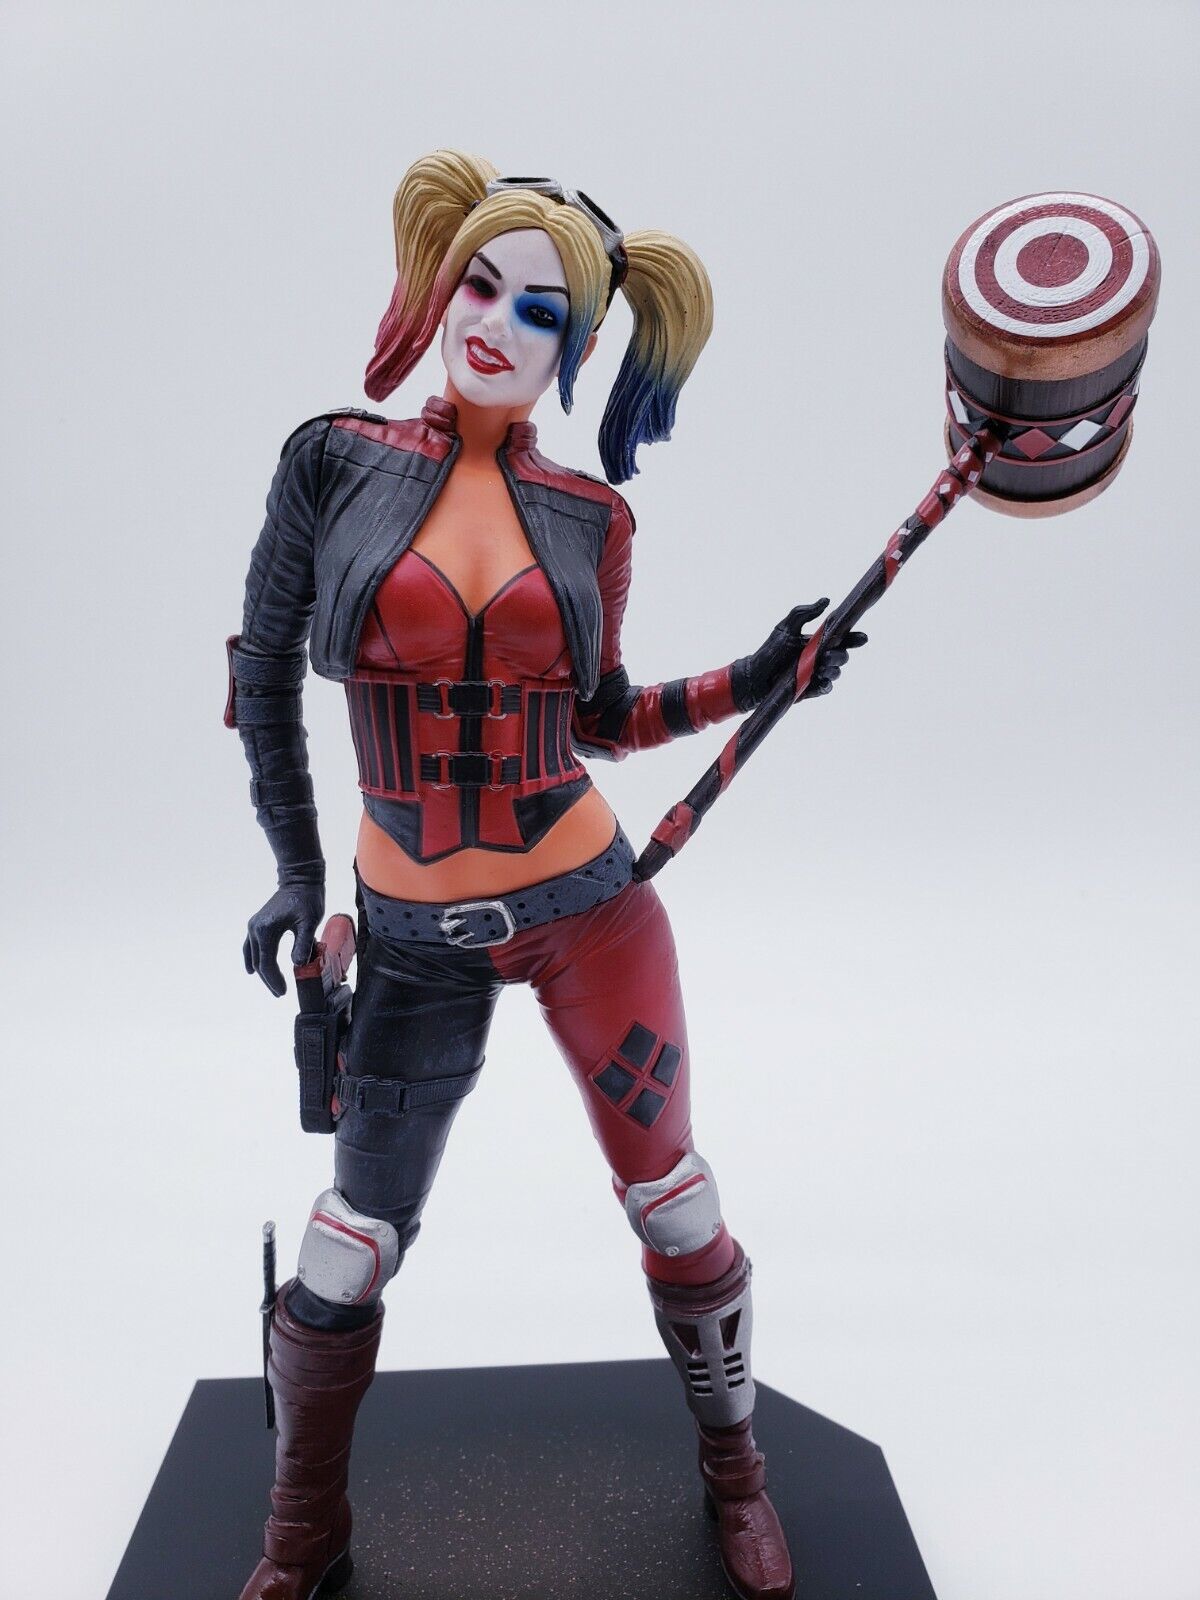 DIAMOND Select Injustice 2 DC Gallery Harley Quinn 9-Inch PVC Statue IN HAND